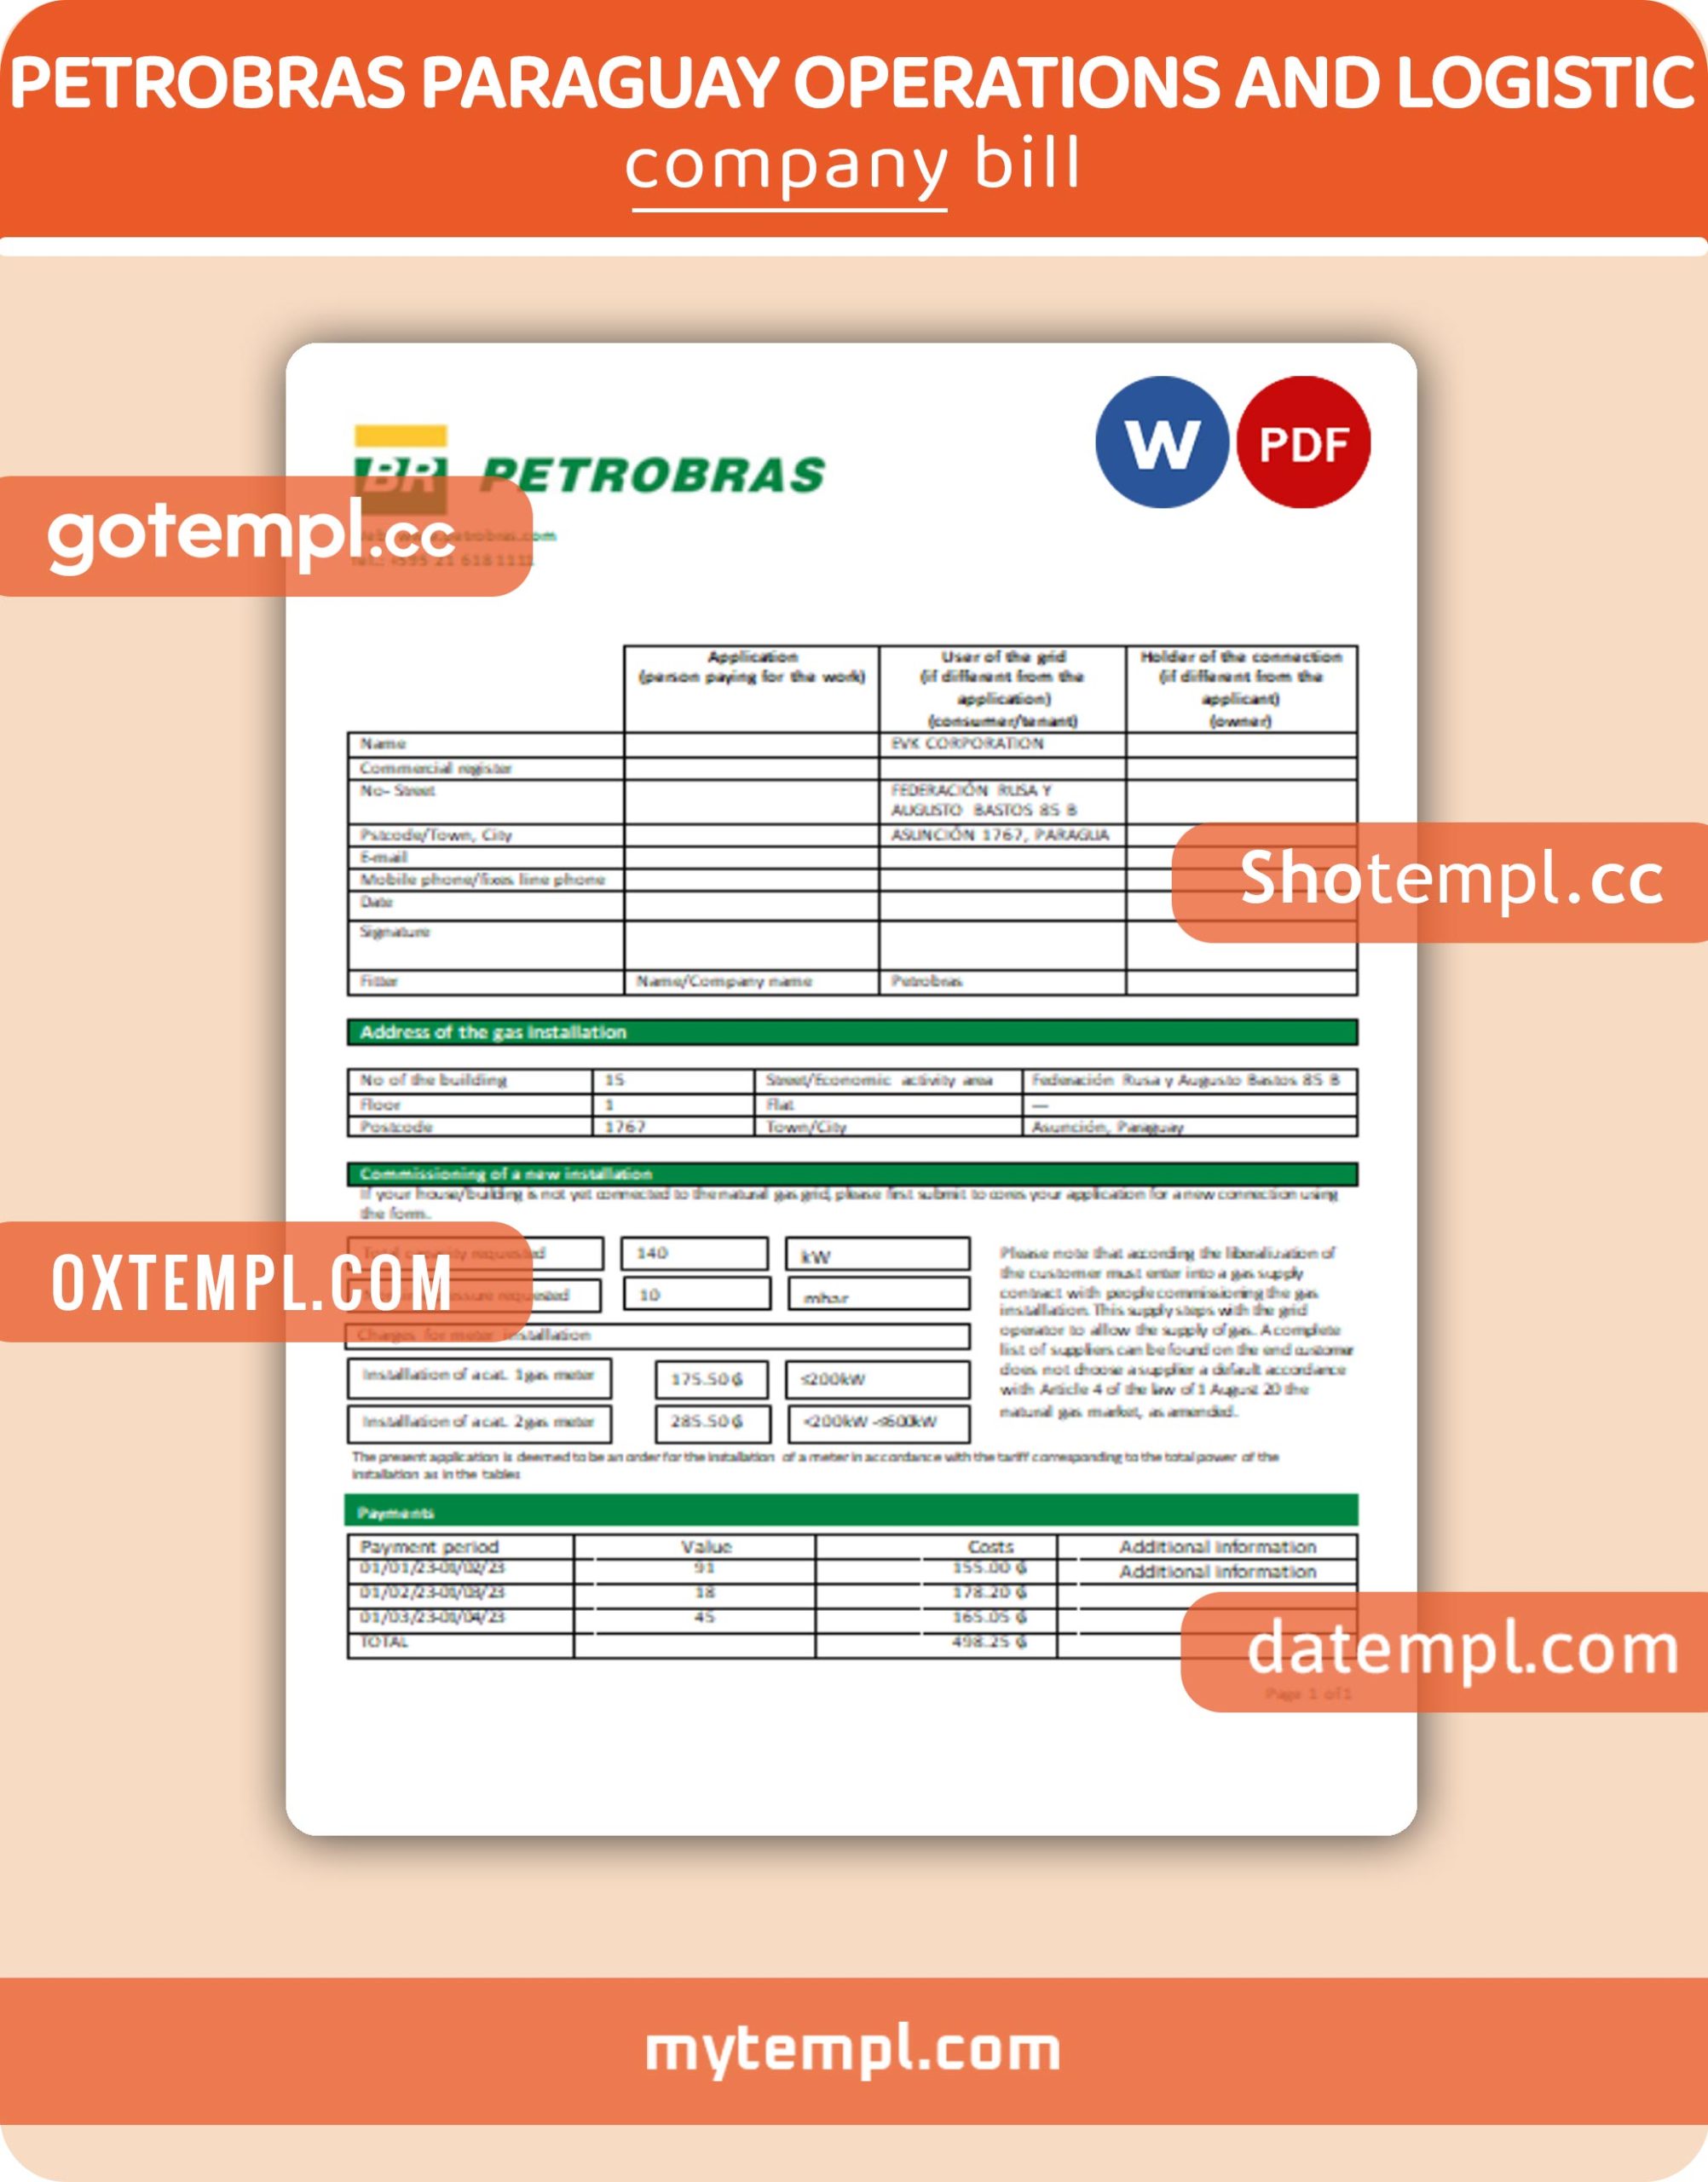 Petrobras Paraguay Operations and Logistics gas utility business bill, Word and PDF template, 4 pages, version 3